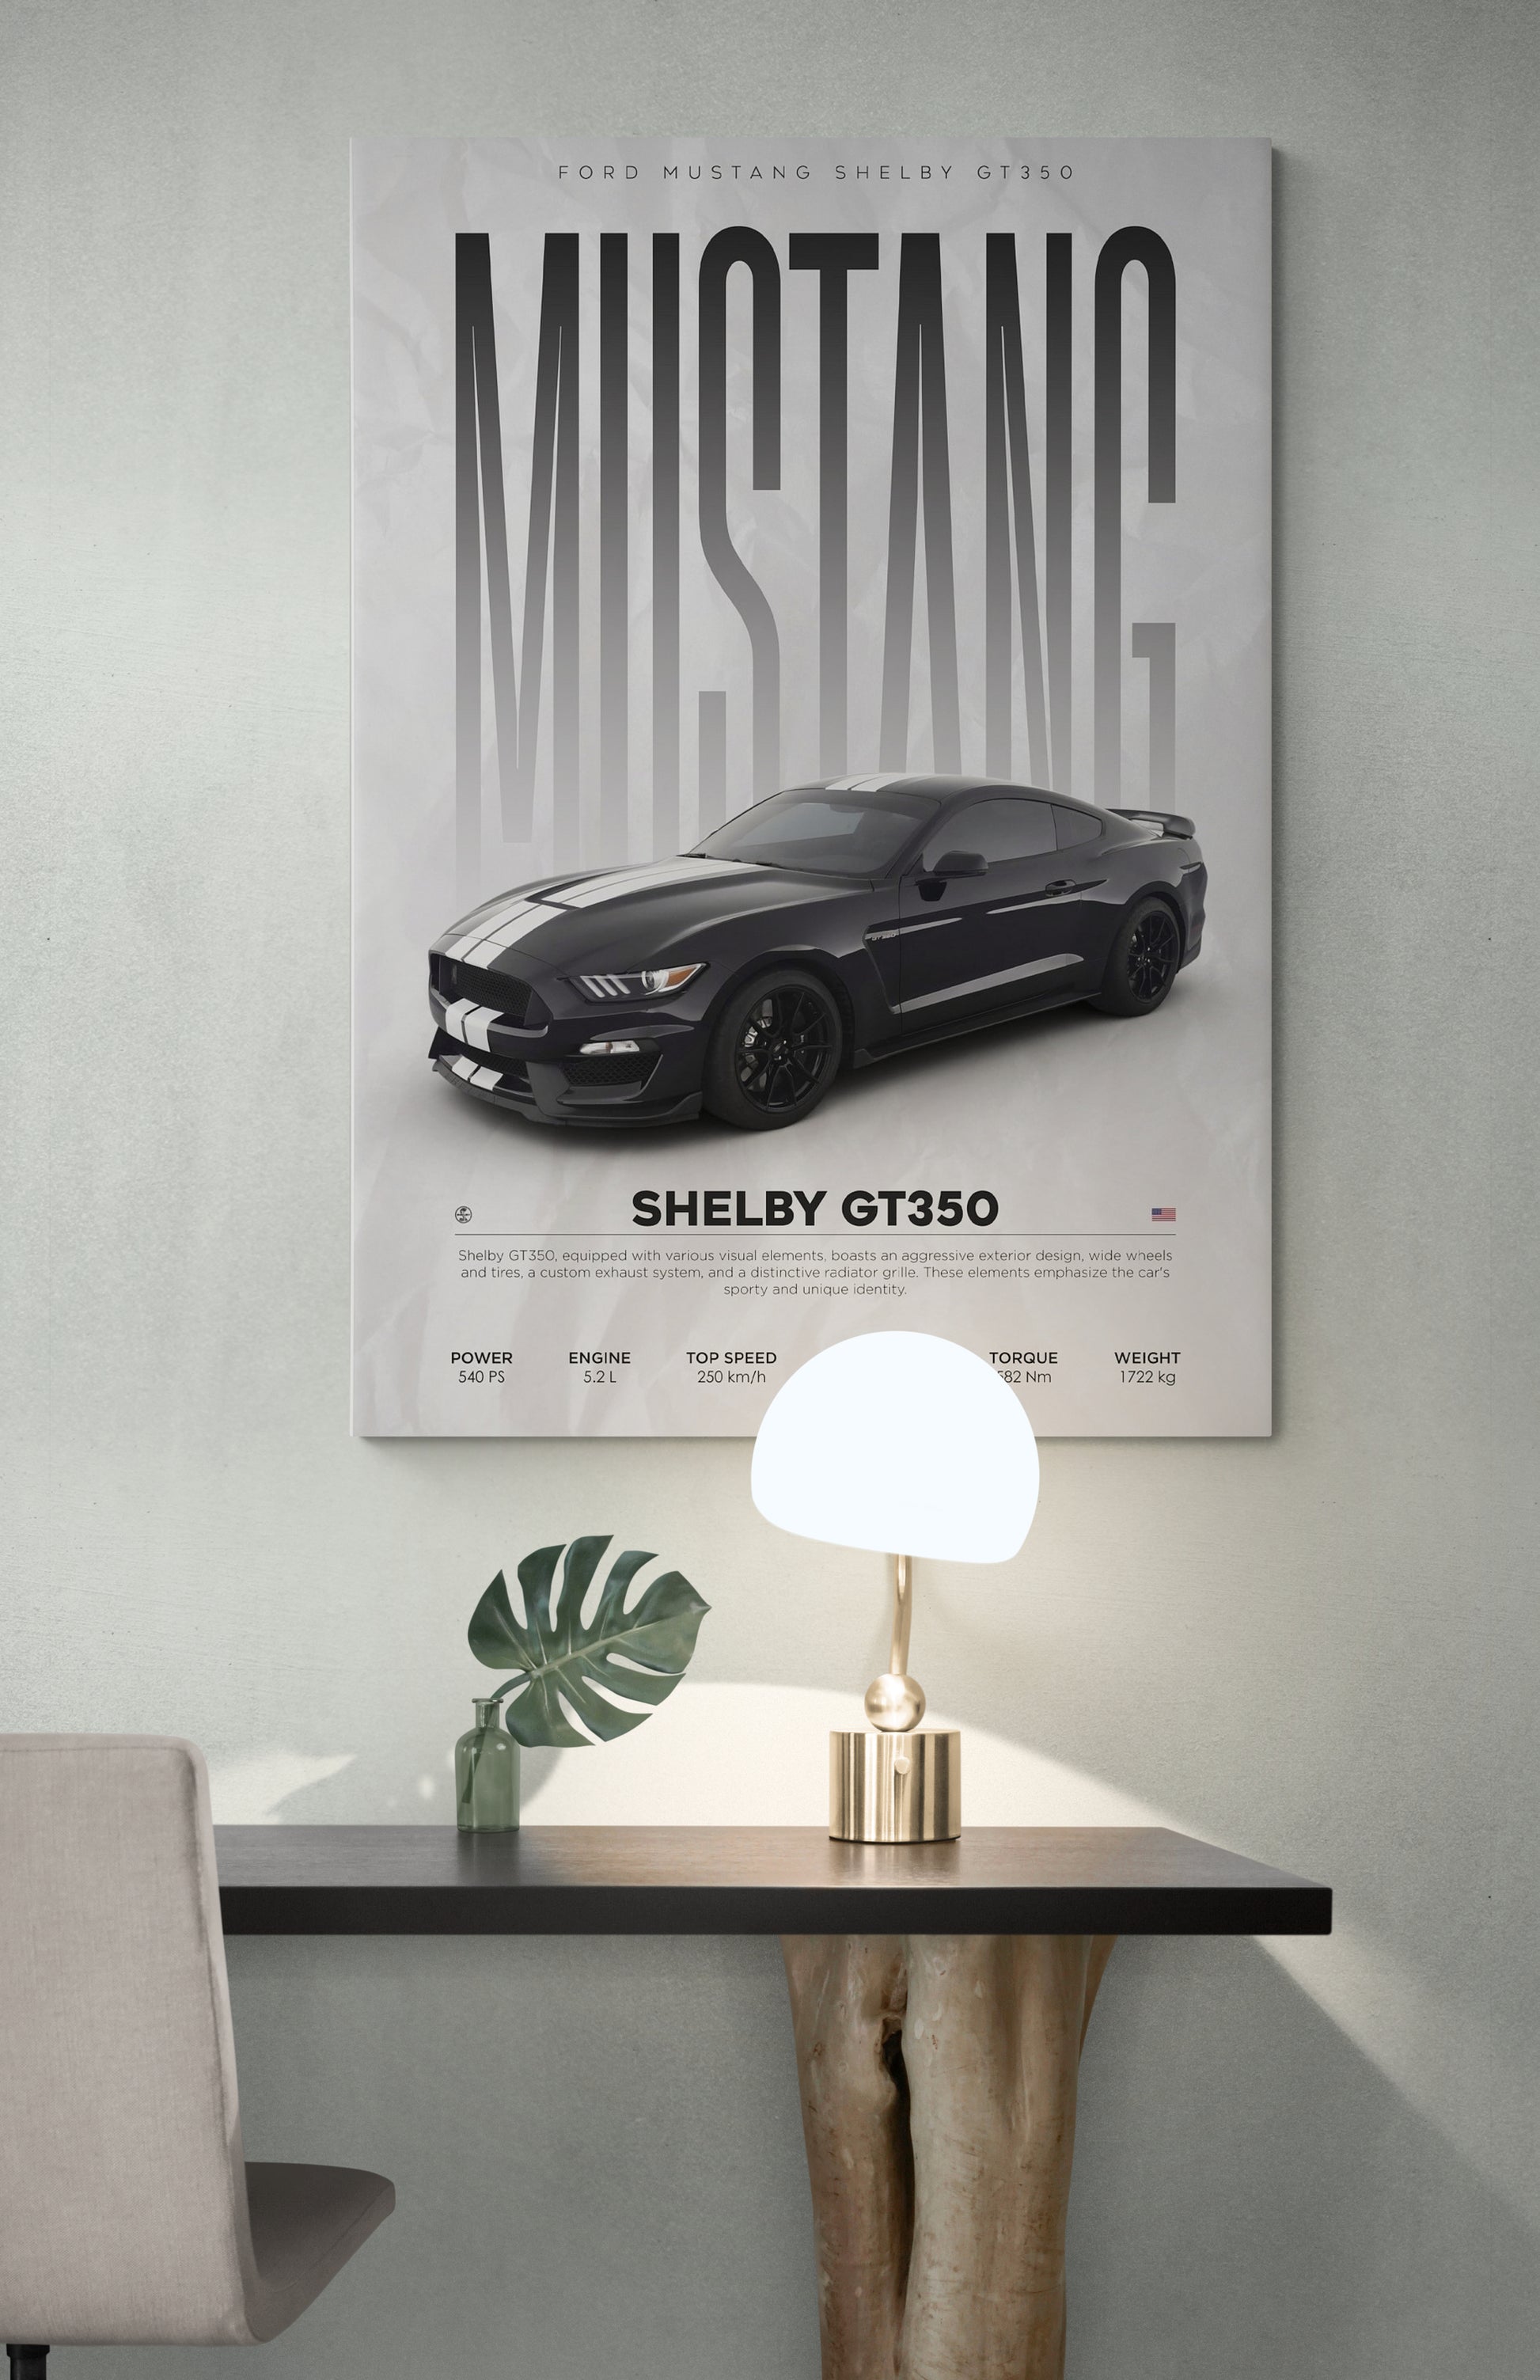  Transform your space with our Mustang GT500 canvas painting, featuring the iconic Cobra Mustang and GT 5.0. Elevate your walls with this stunning wall painting canvas from Essential Walls.